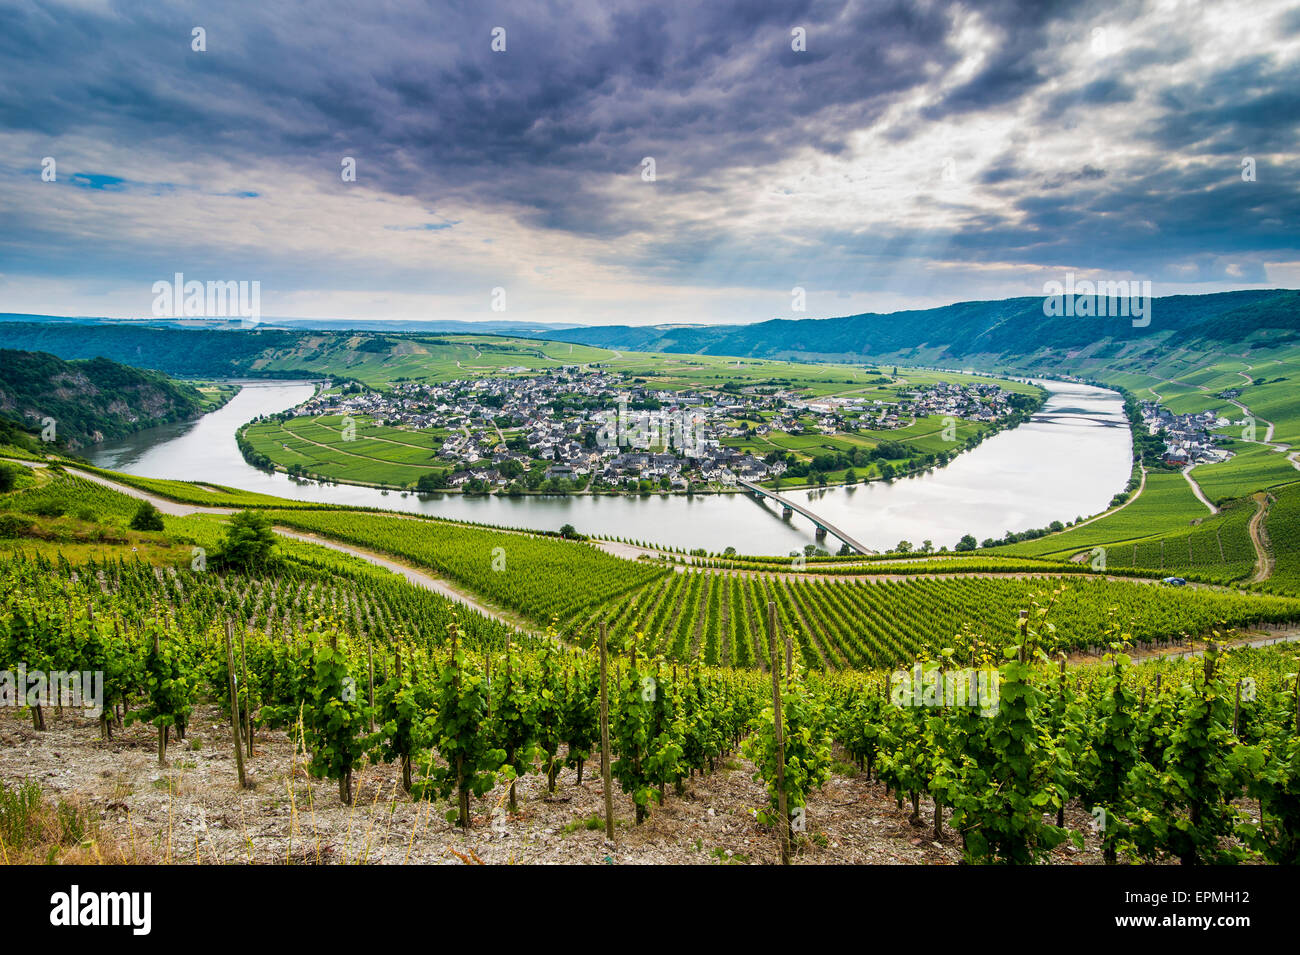 Germany, Rhineland-Palatinate, Moselle valley, river bend at Minheim Stock Photo